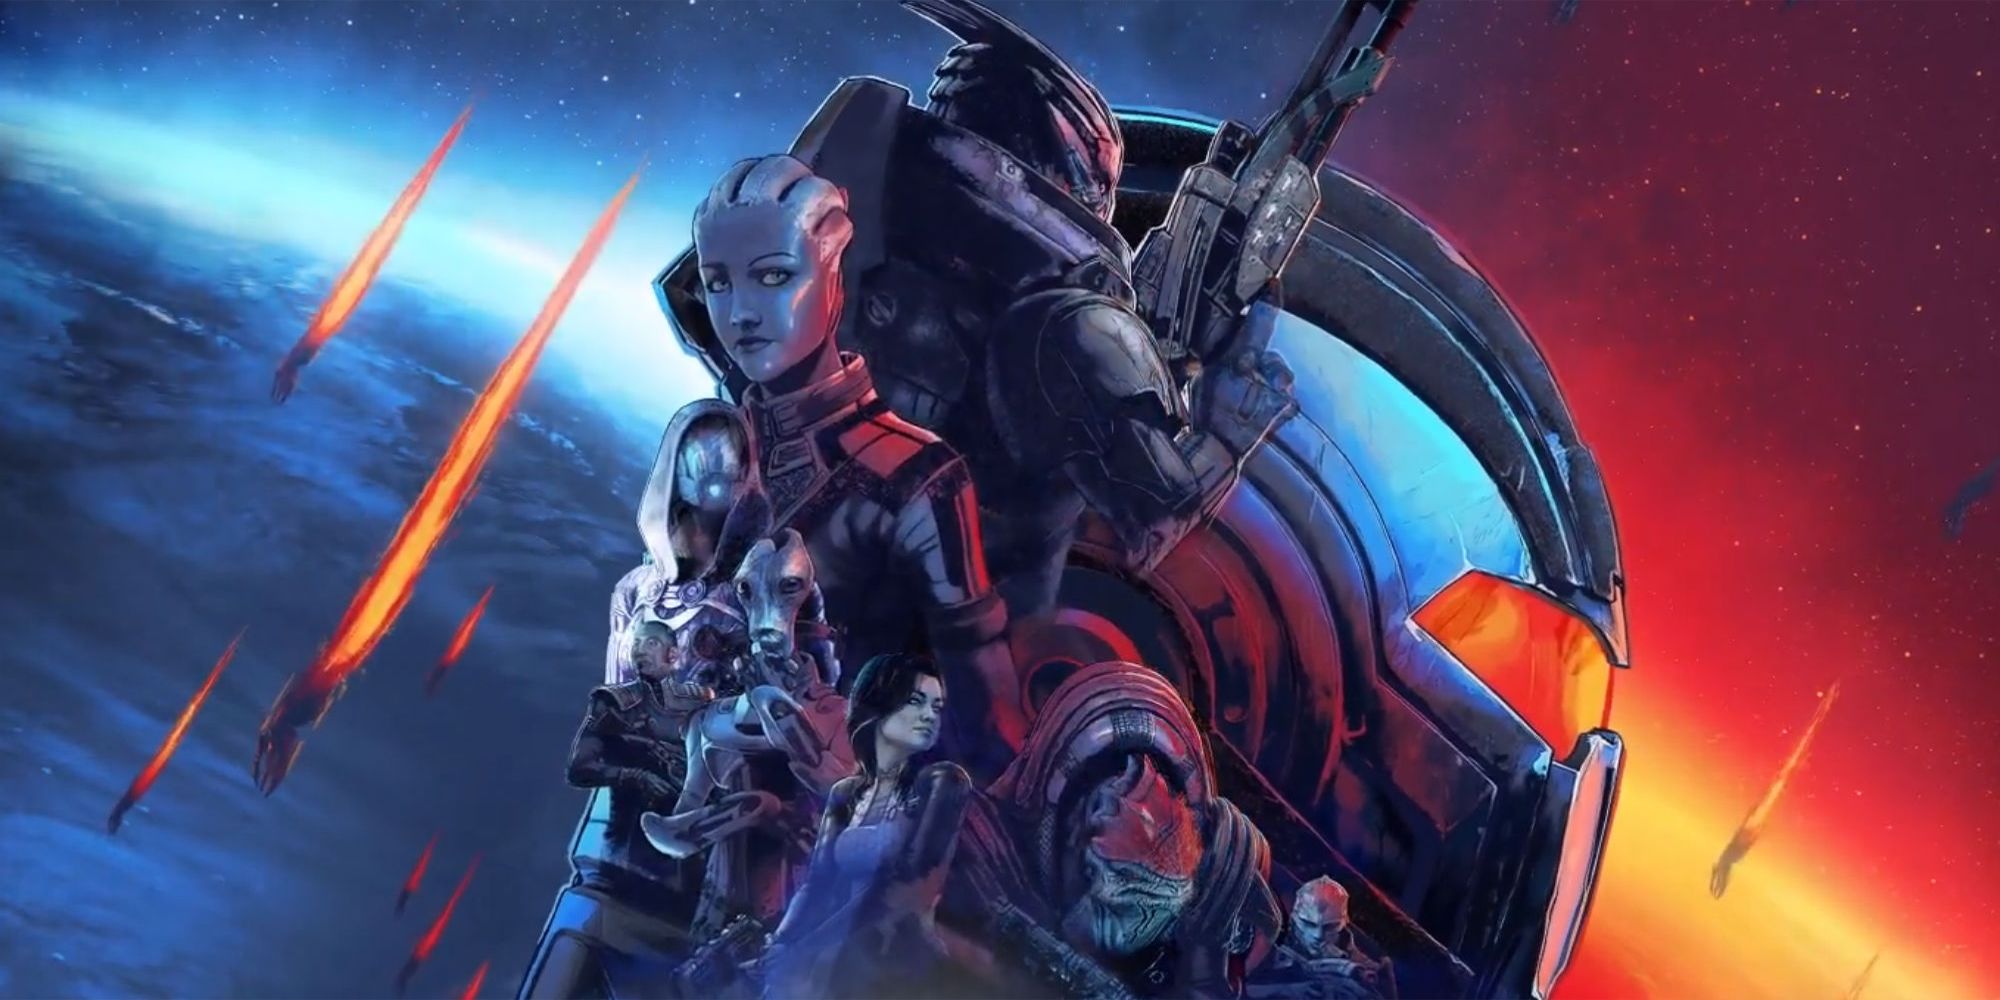 Mass Effect Legendary Edition cover art featuring characters in front of a blue and red background